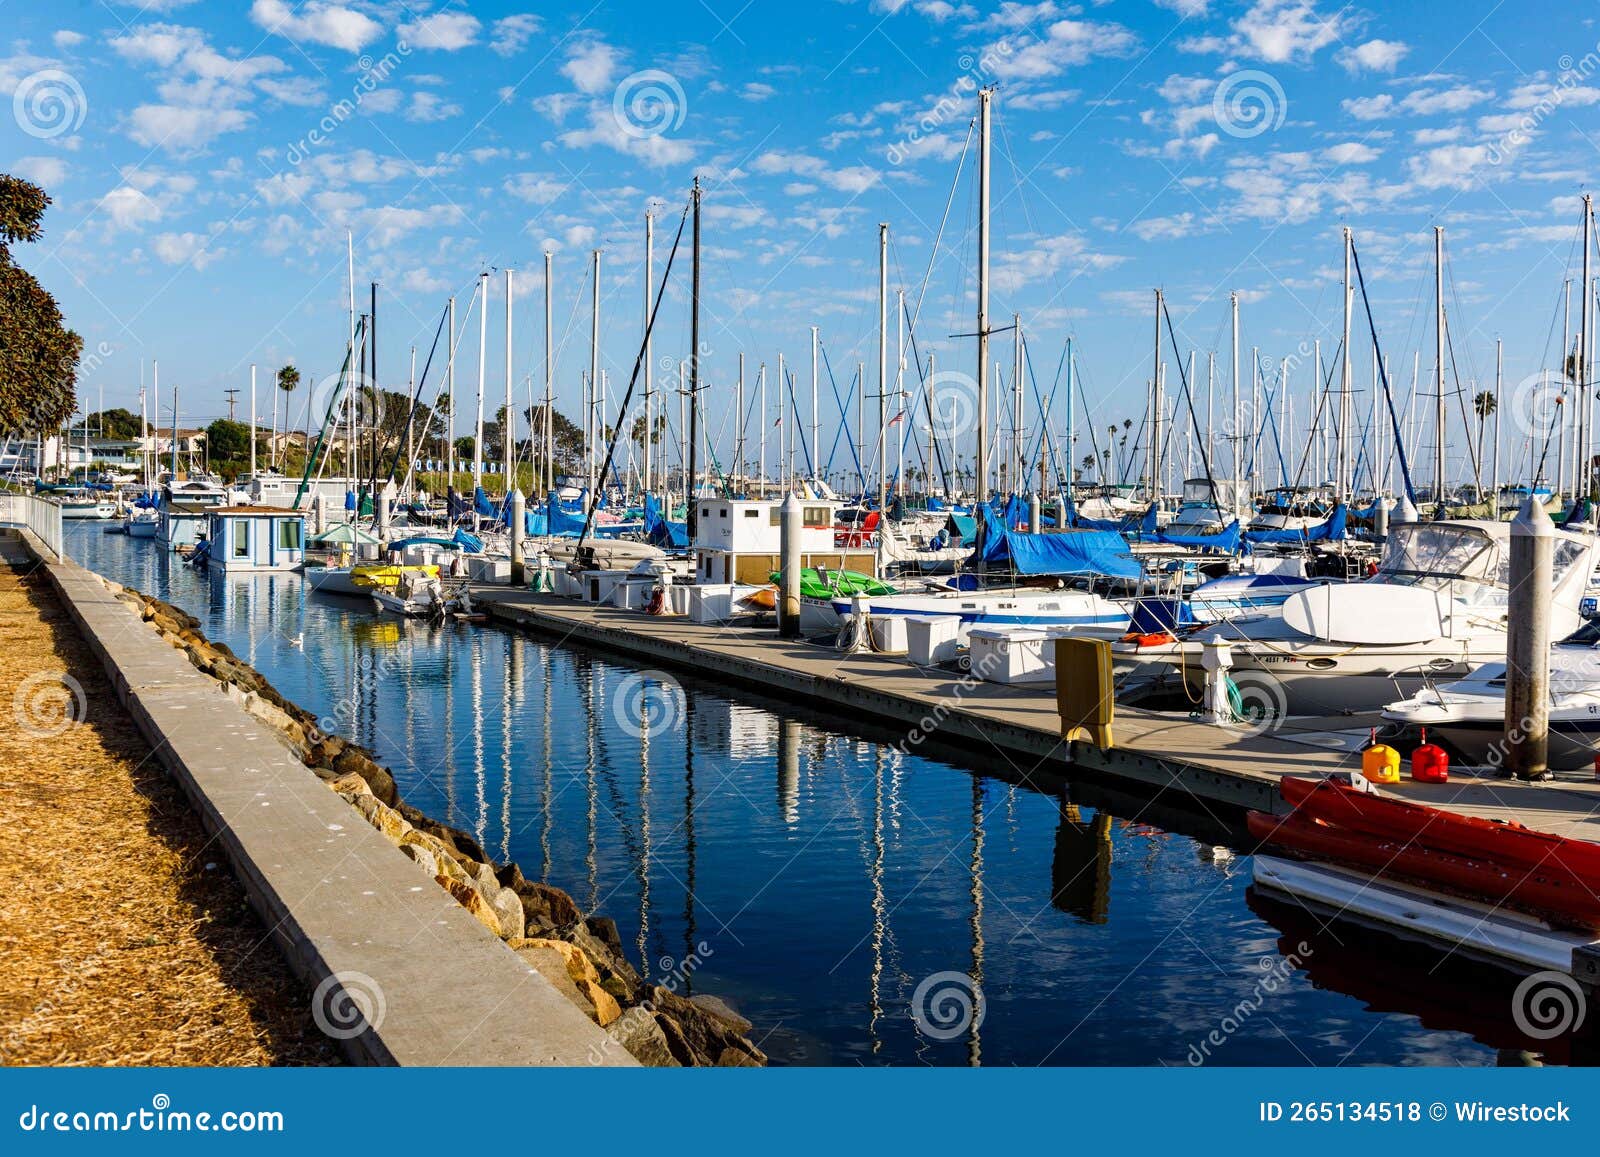 Boats Docked at Oceanside Harbor Editorial Stock Photo - Image of ...